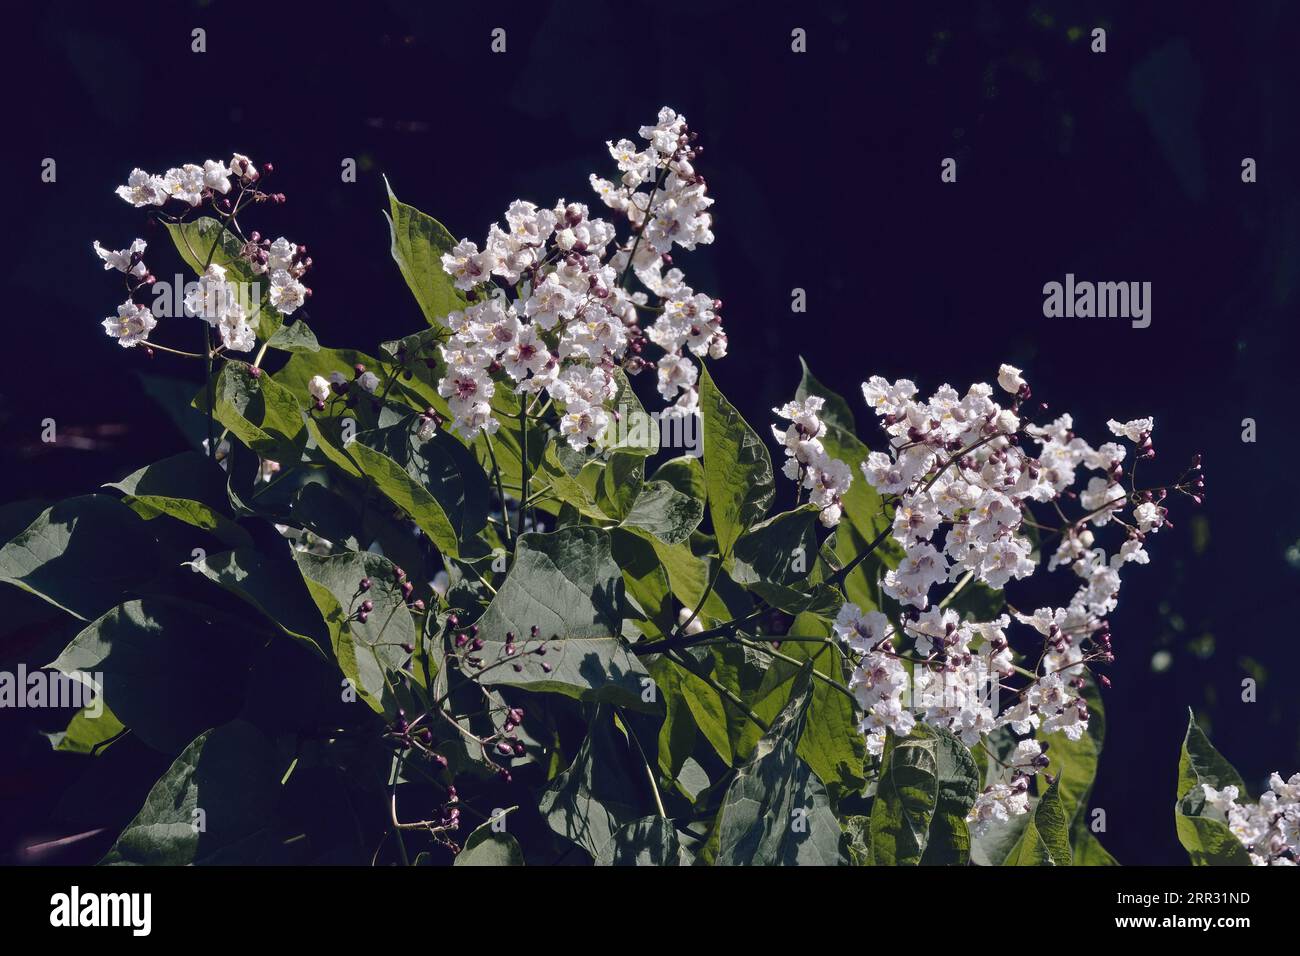 detail of a plant of northern catalpa in blooming against a dark background, Catalpa speciosa; Bignoniaceae Stock Photo